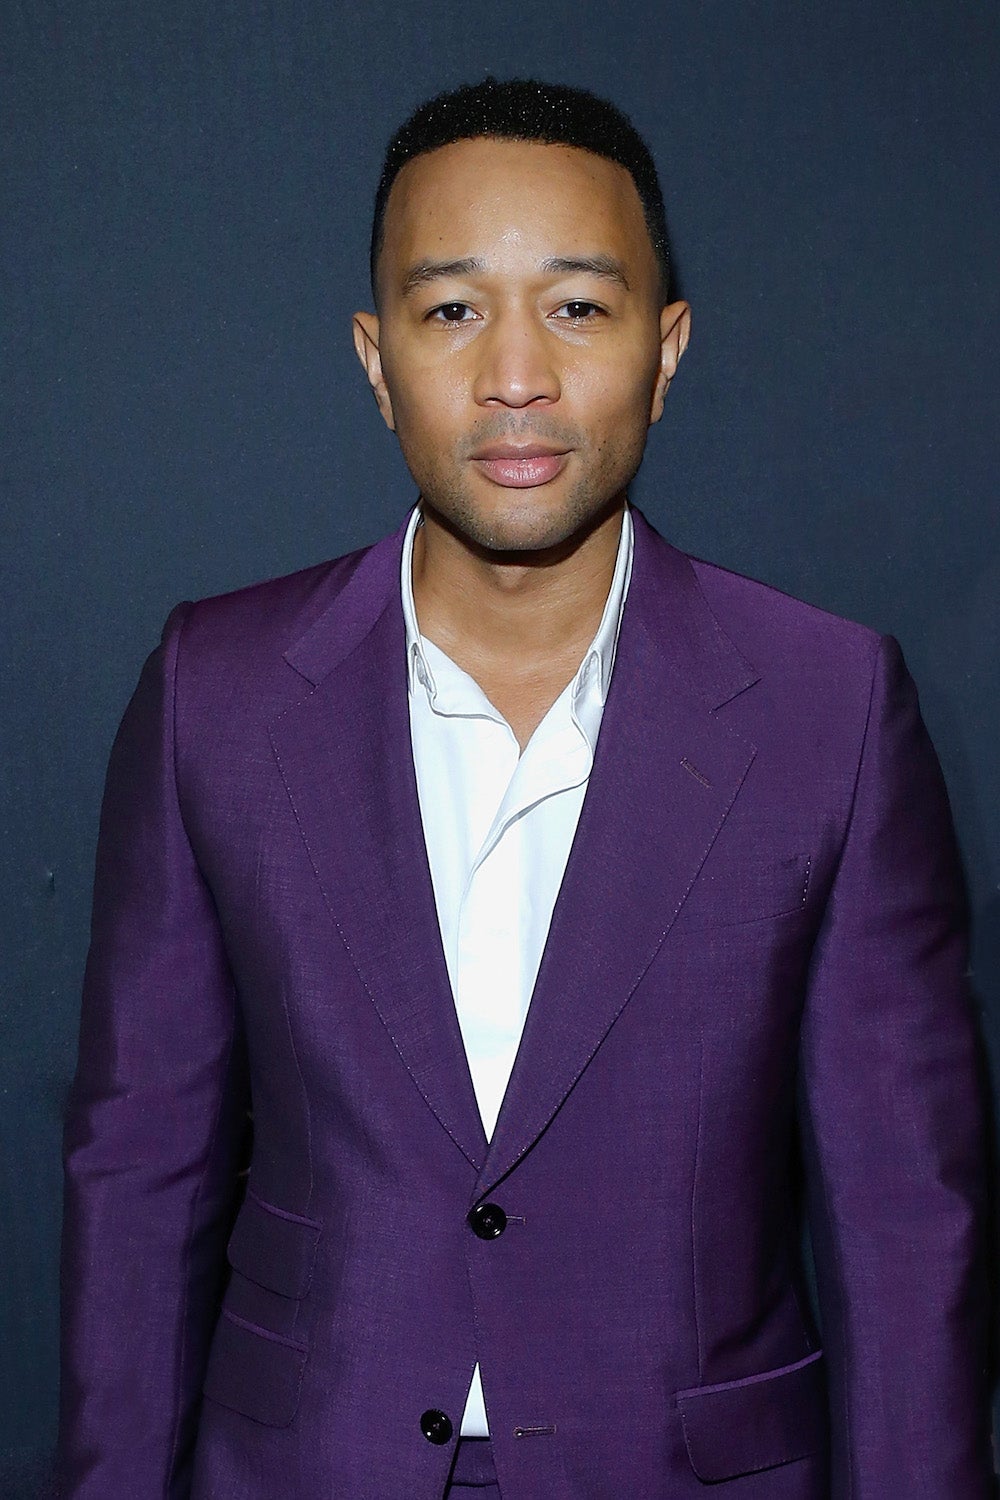 John Legend Calls Out Louisiana For Its White Supremacist Policies